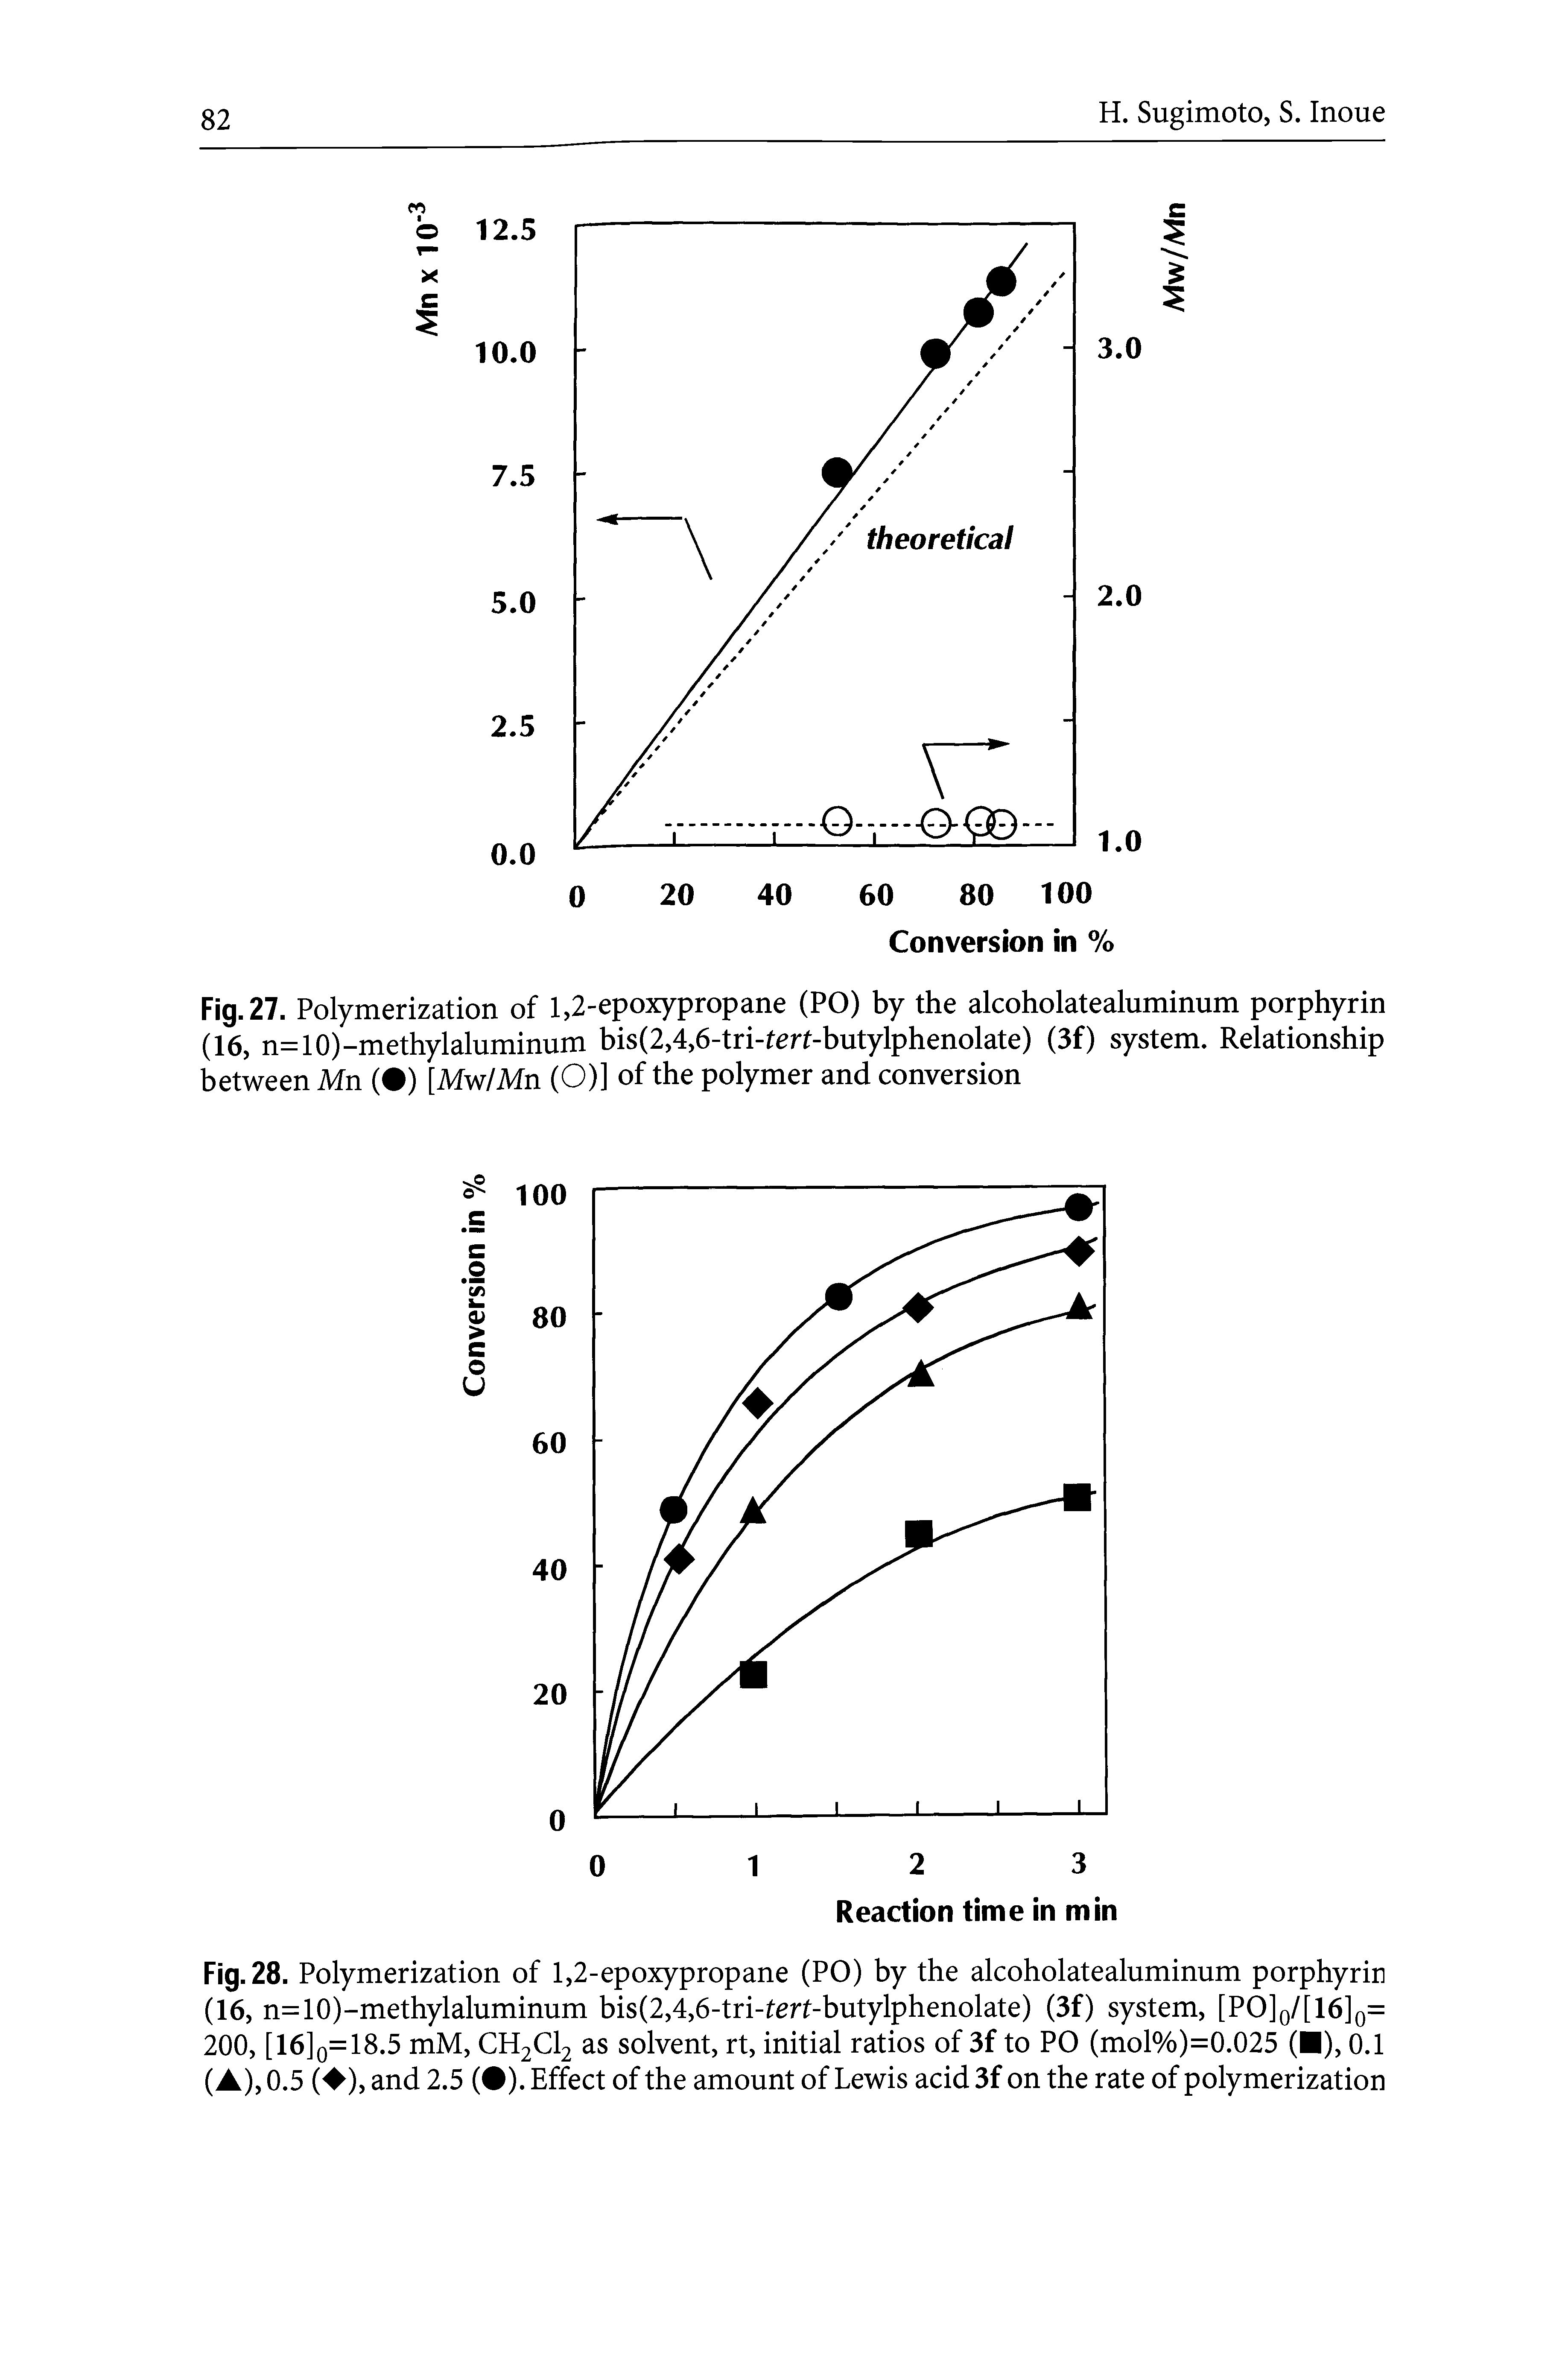 Fig. 27. Polymerization of 1,2-epoxypropane (PO) by the alcoholatealuminum porphyrin (16, n=10)-methylaluminum bis(2,4,6-tri-tert-butylphenolate) (3f) system. Relationship between Mn ( ) [Mw/Mn (O)] of the polymer and conversion...